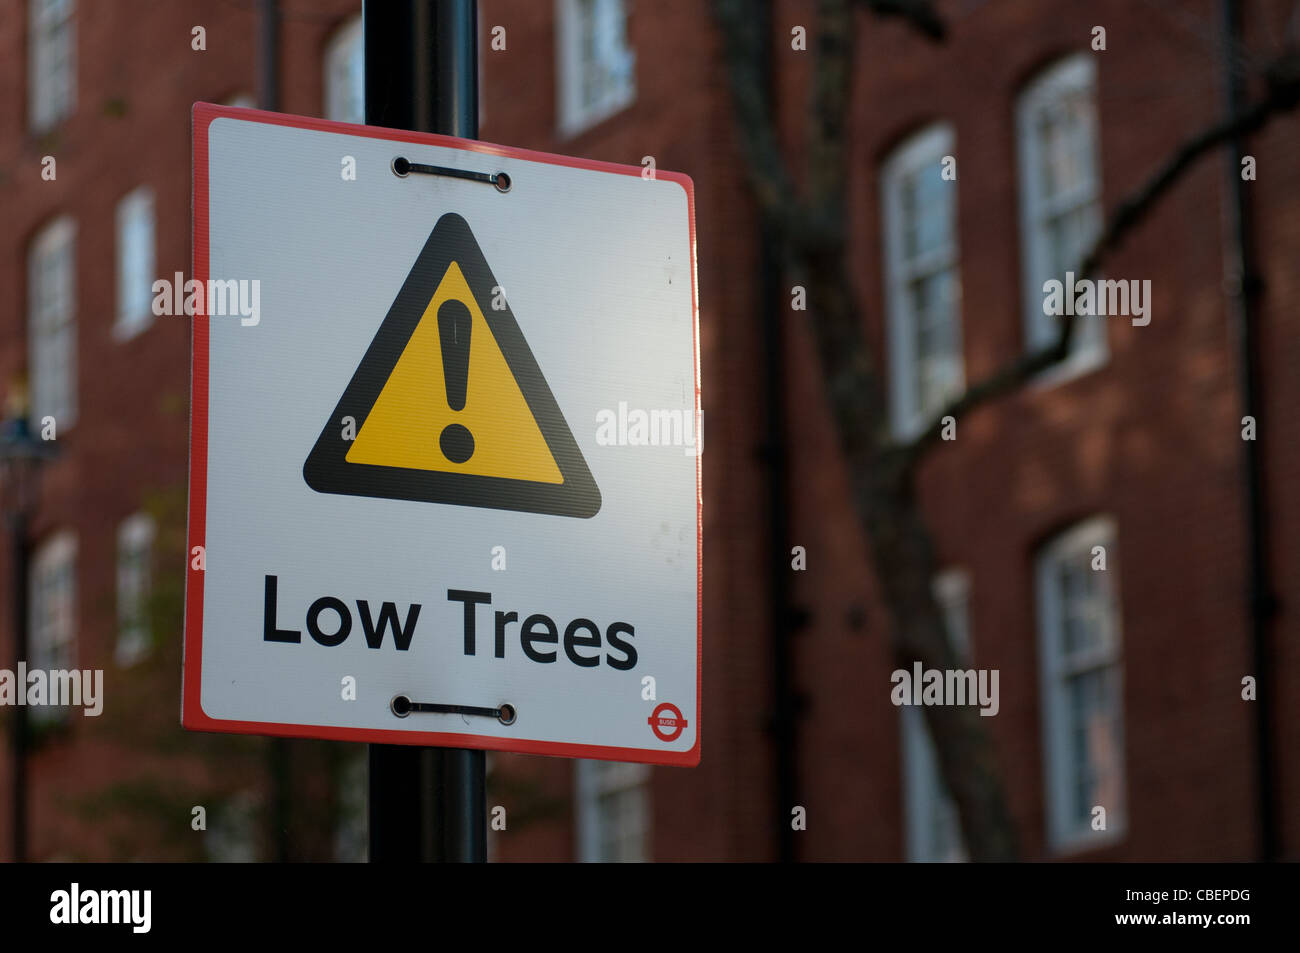 Low Trees Warning Sign in a Residential Street, London, England, UK Stock Photo